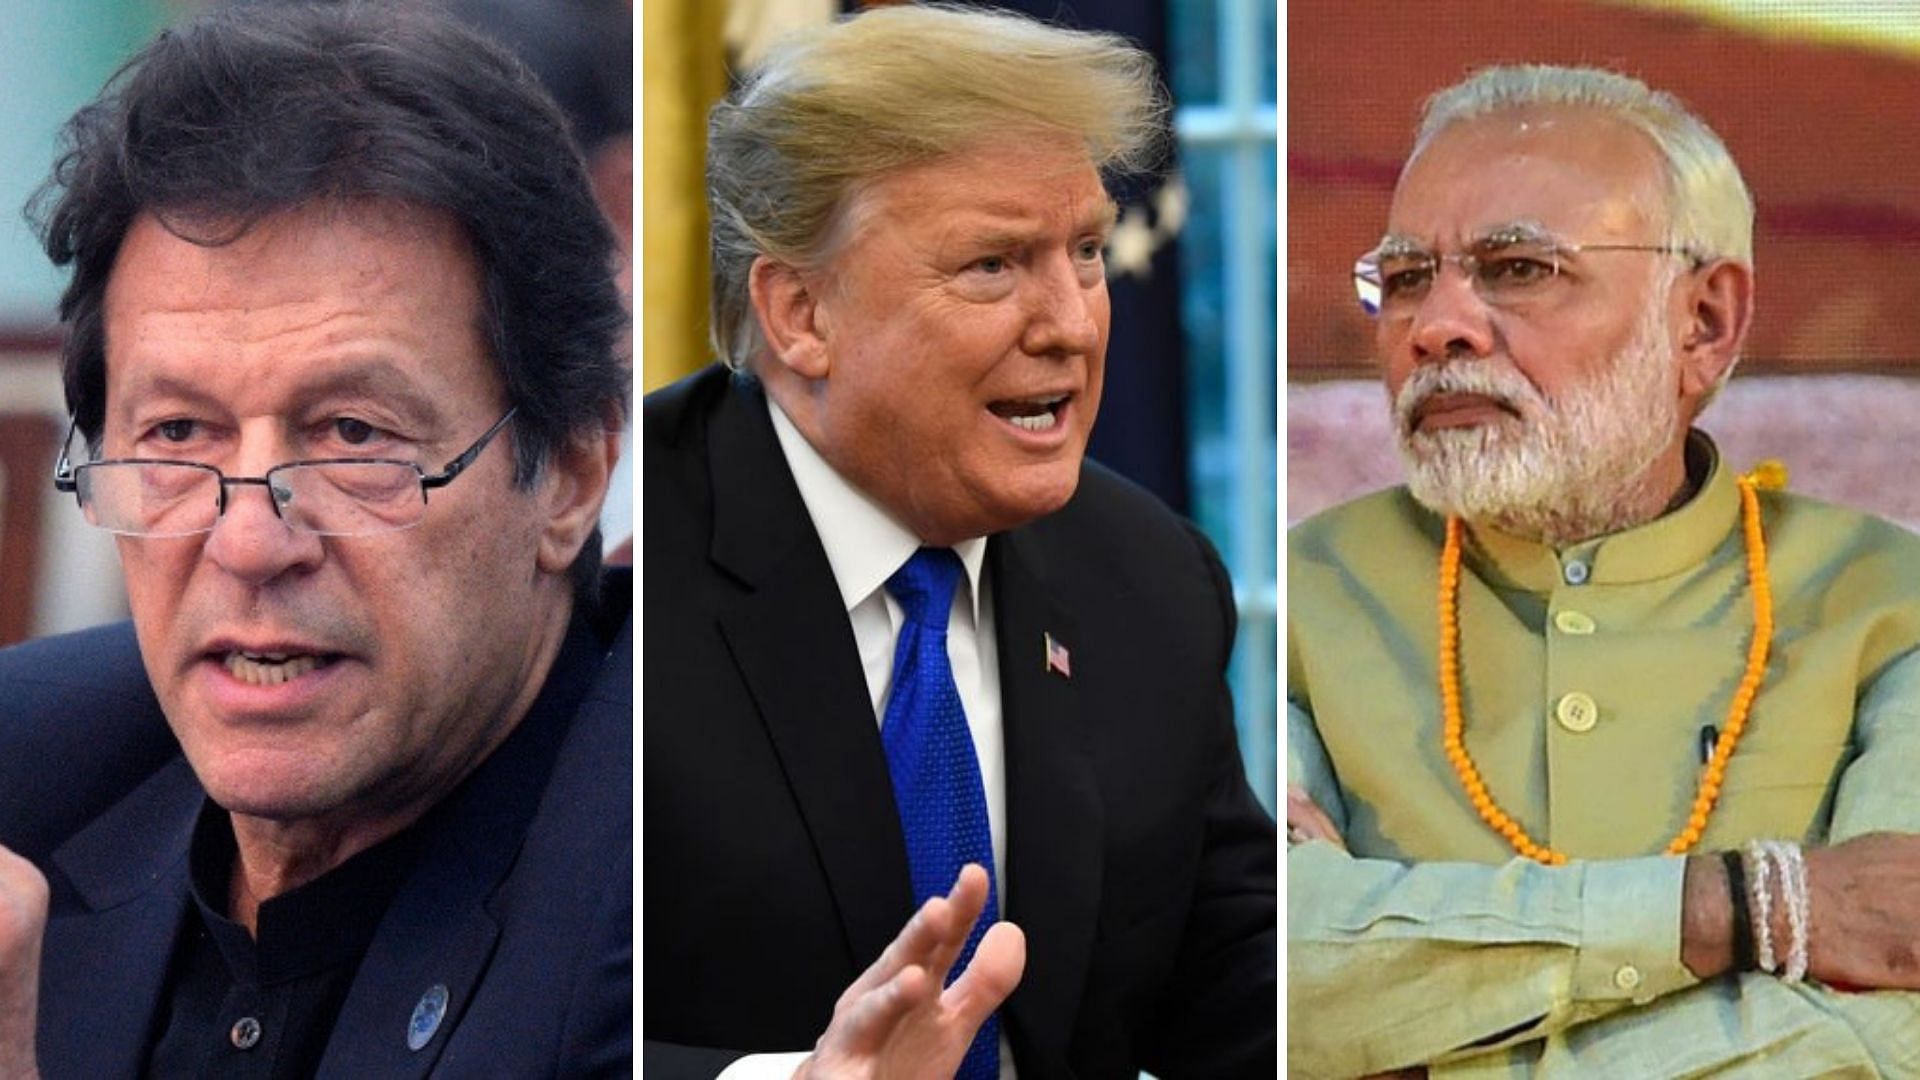 Donald Trump in a meeting with Pakistan Prime Minister Imran Khan on Monday, 22 July, said that PM Modi has asked him to help with “disputed Kashmir” region and that he would “love to be a mediator.”